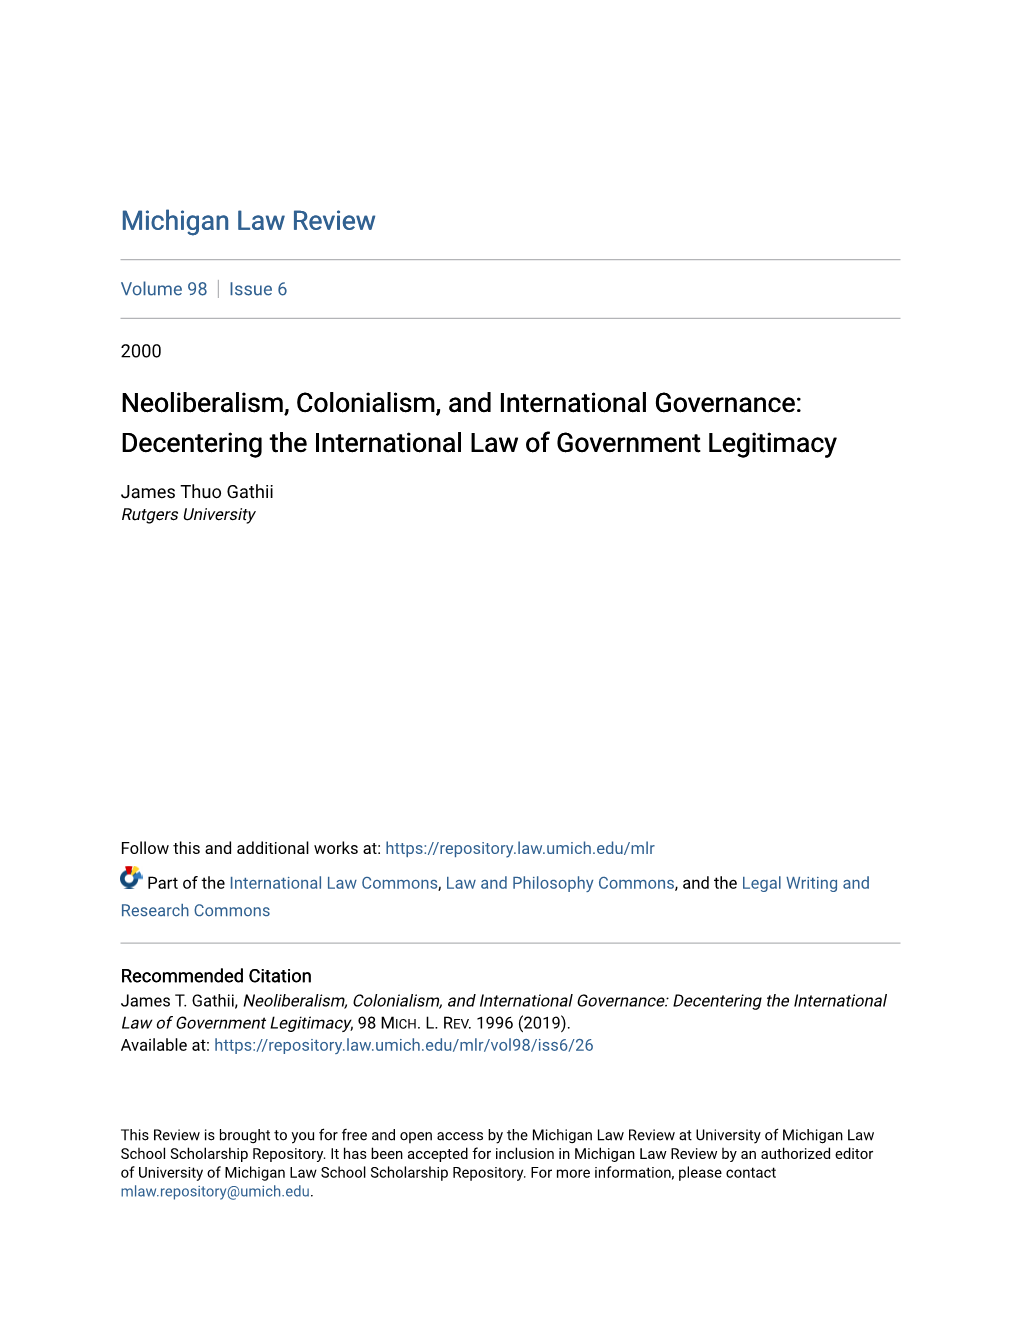 Neoliberalism, Colonialism, and International Governance: Decentering the International Law of Government Legitimacy